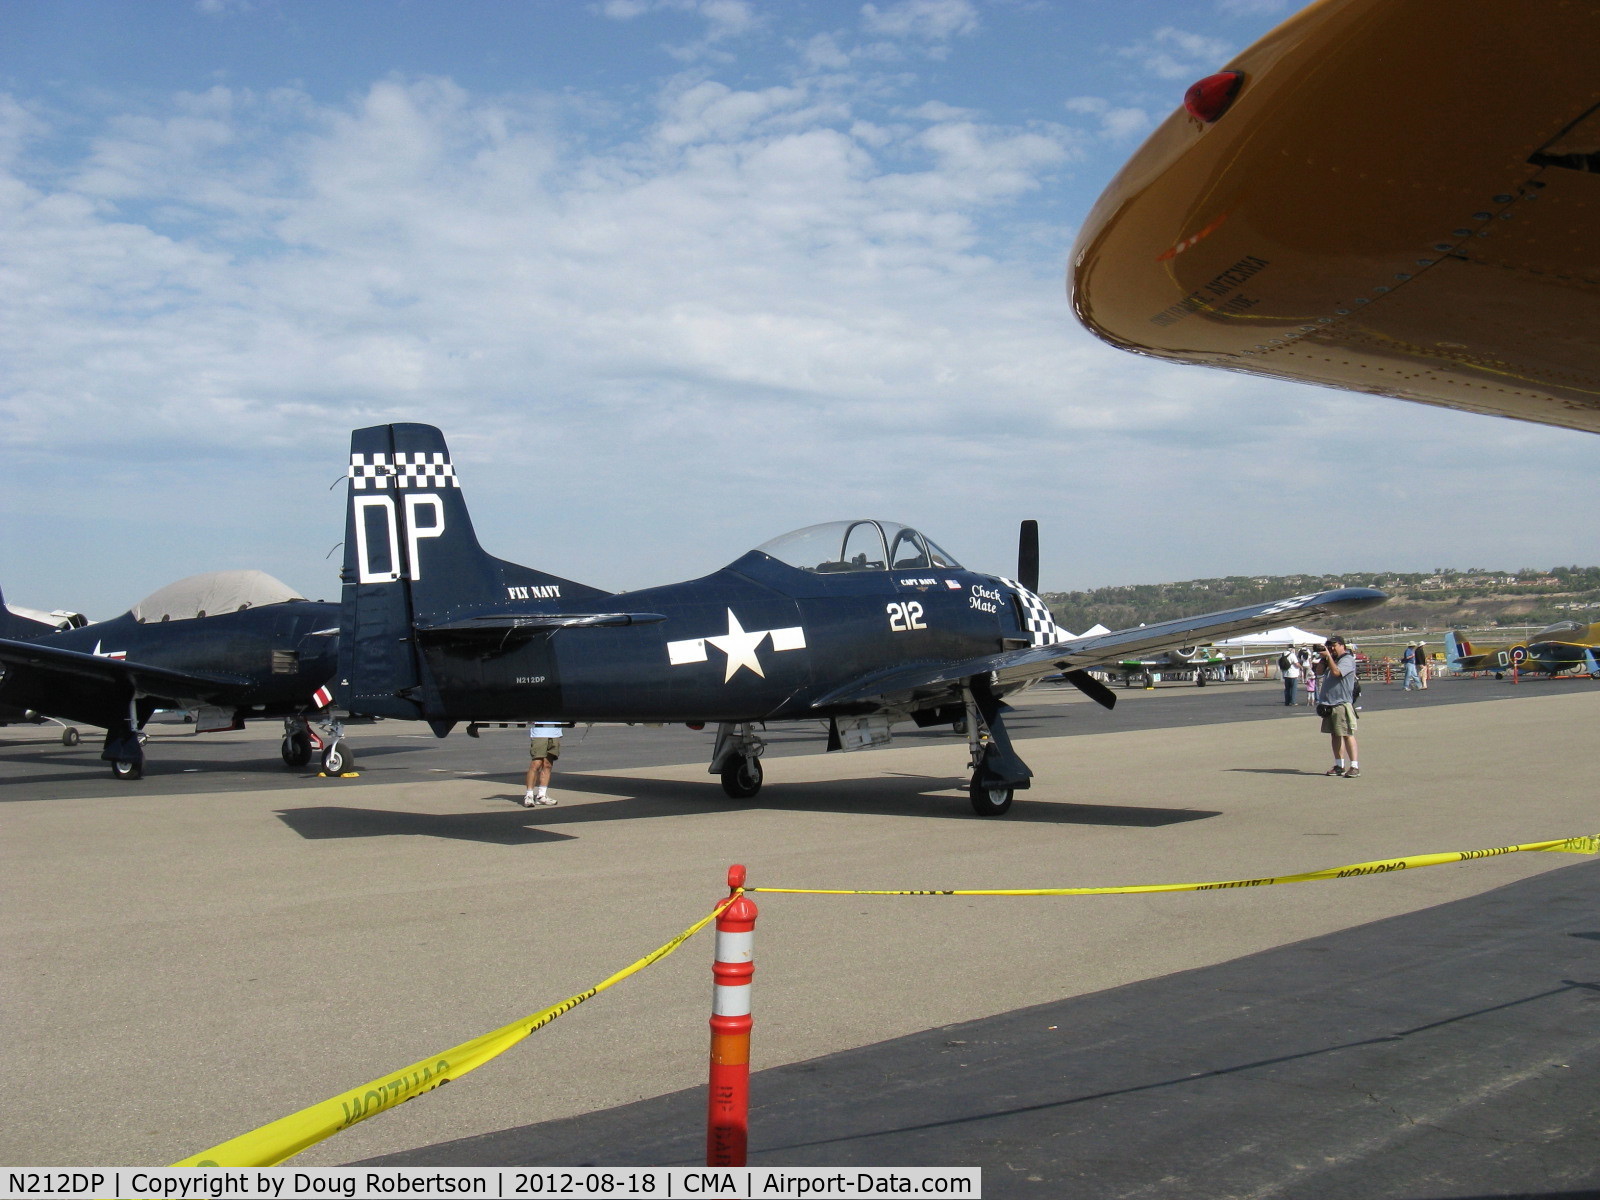 N212DP, 1949 North American T-28A Trojan C/N 159-128, 1949 North American T-28A TROJAN 'CHECKMATE', Wright R-1300 800 Hp, in Navy blue, unusual as USN rejected A model for higher horsepower & other changes in the -B, -C models.